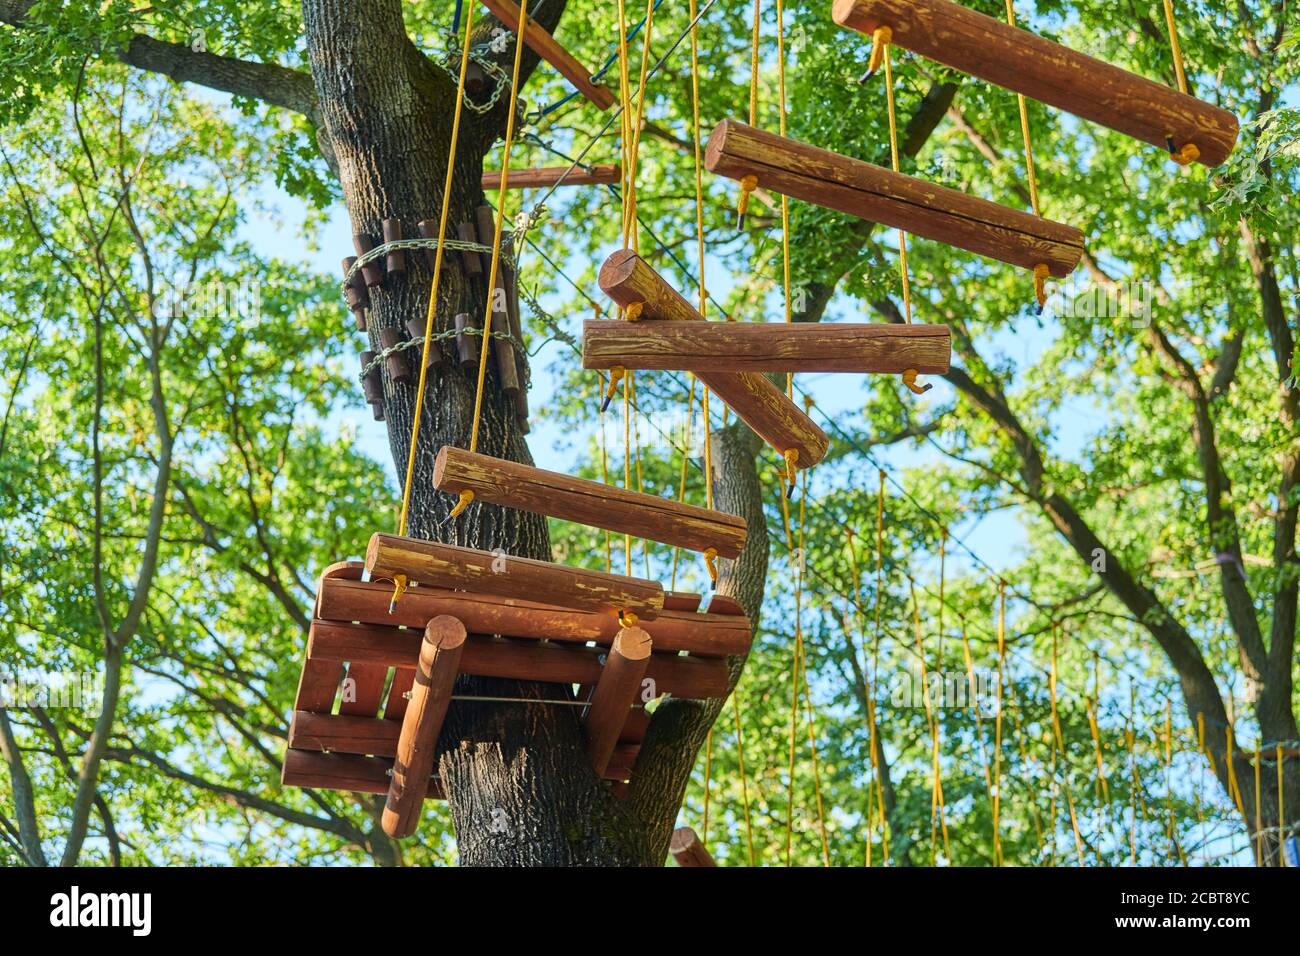 High ropes experience adventure tree park. Rope road course in